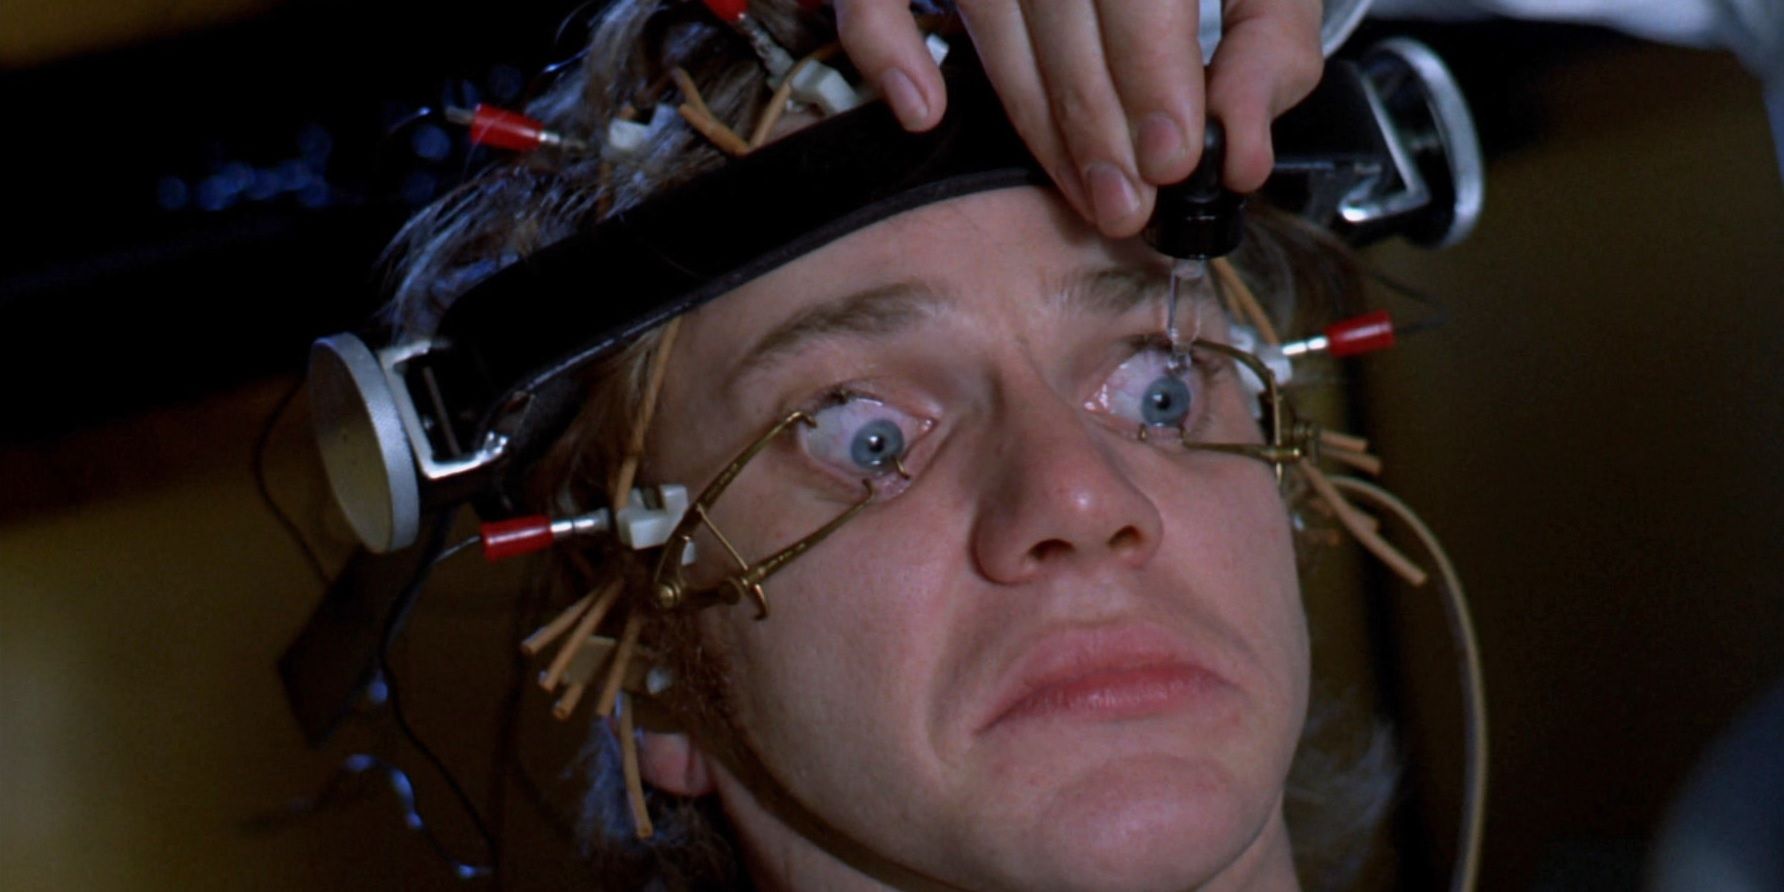 Clockwork Orange Malcolm McDowell with his eyes forced open